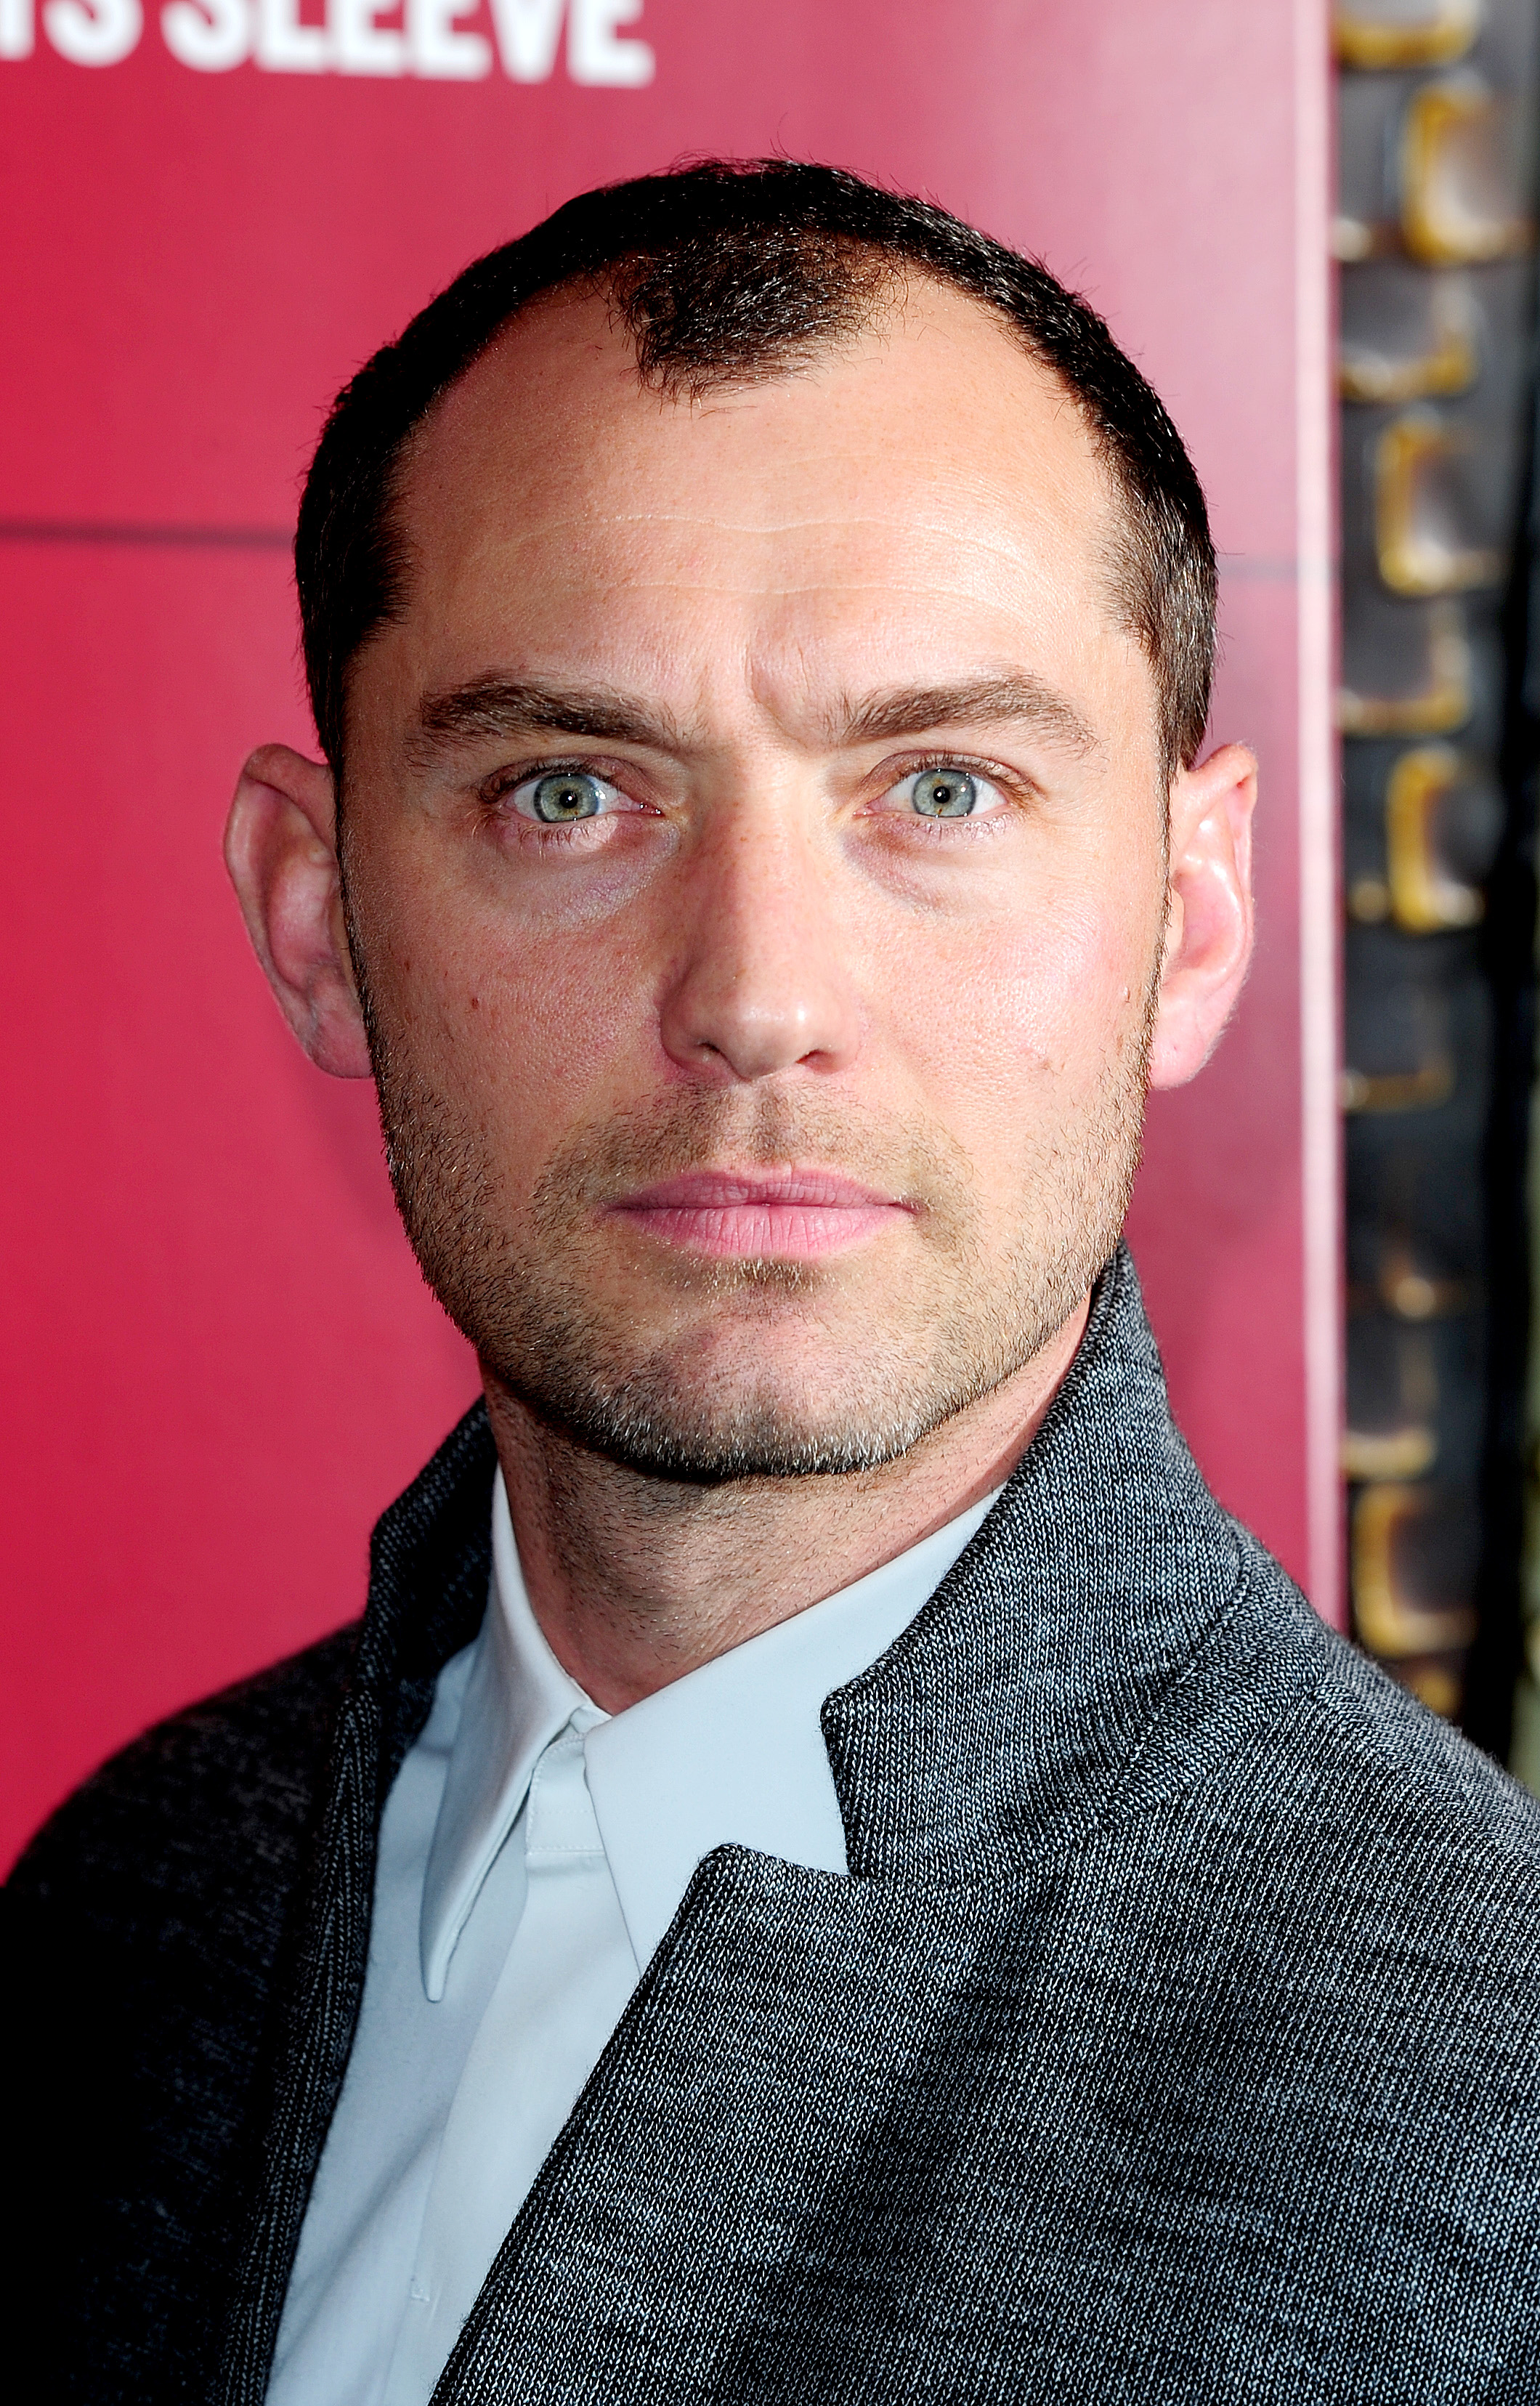 Jude Law at the screening of "Dom Hemingway" on October 28, 2013, in London, England. | Source: Getty Images